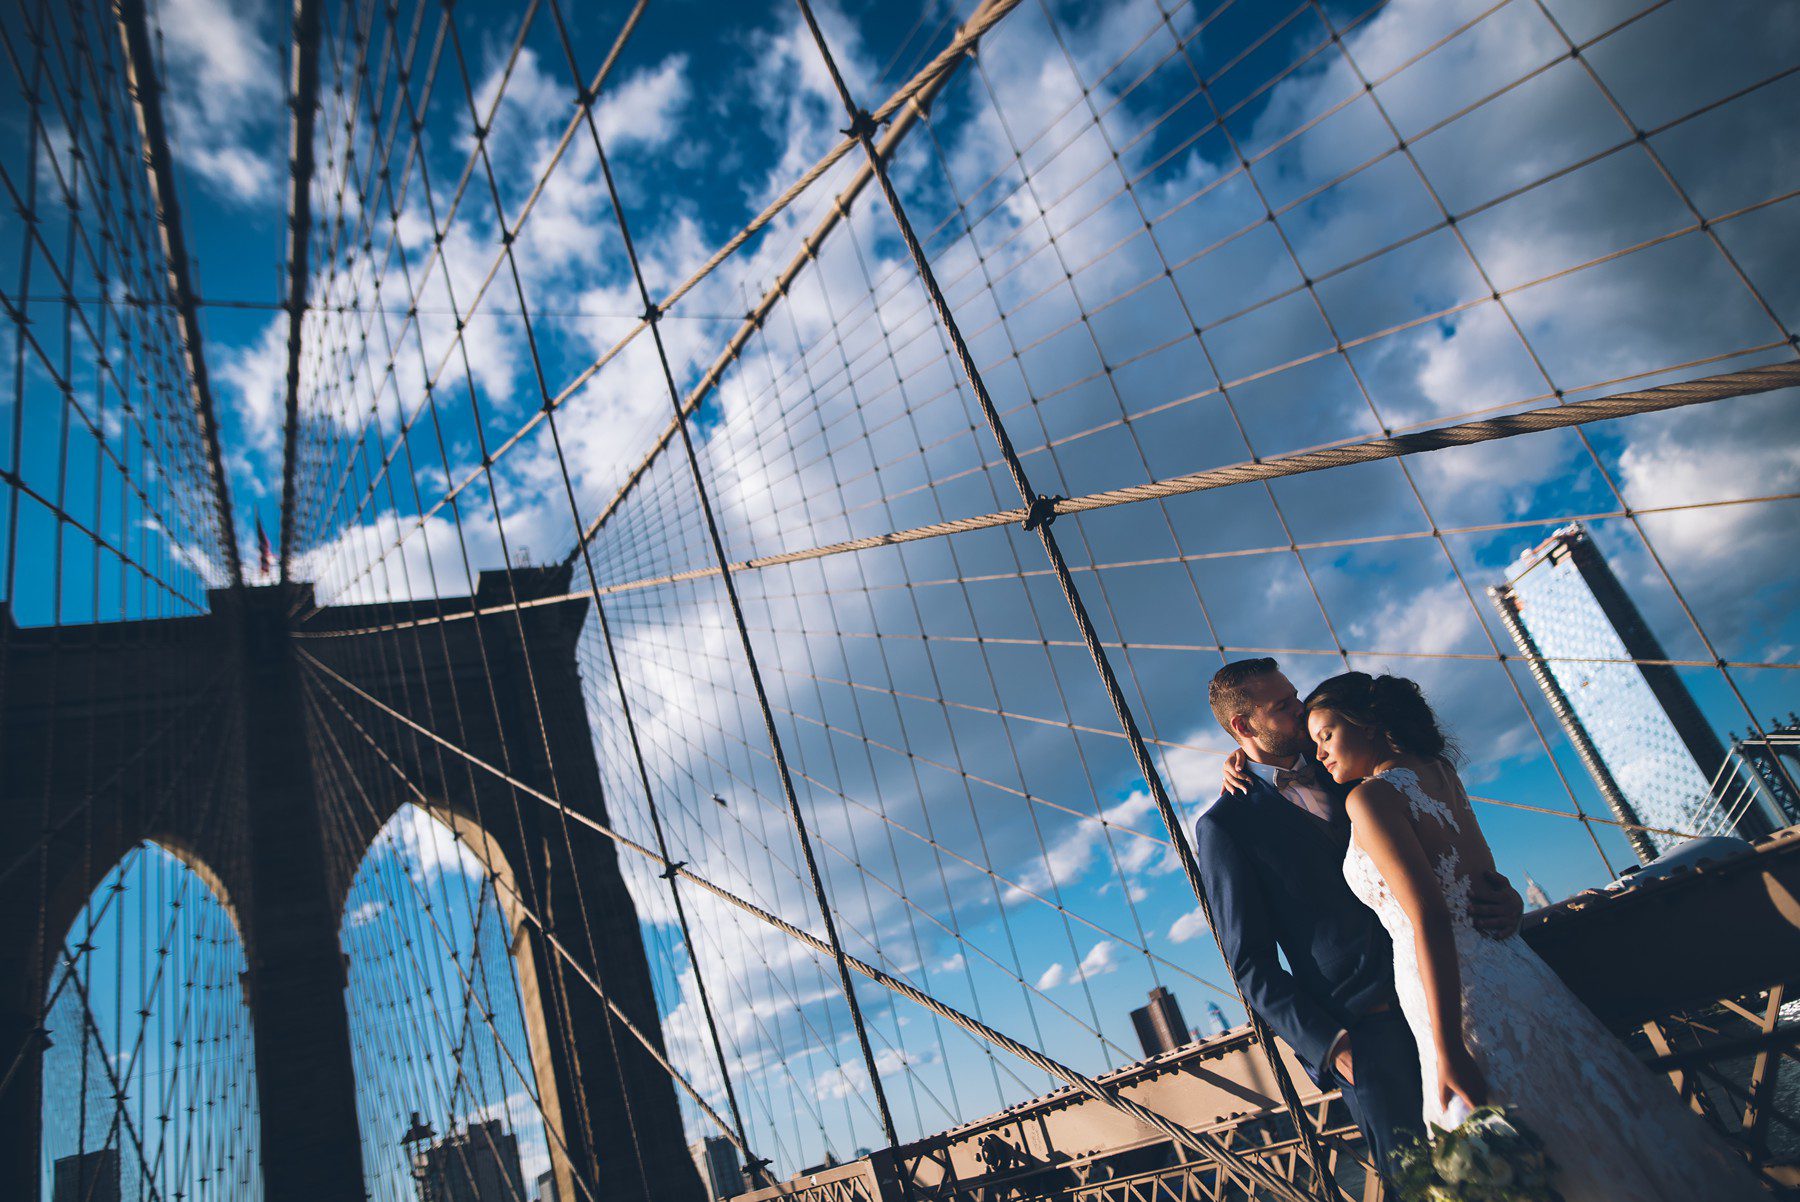 Jackie & Sascha, the New York City Elopement Team - all inclusive NYC wedding packages